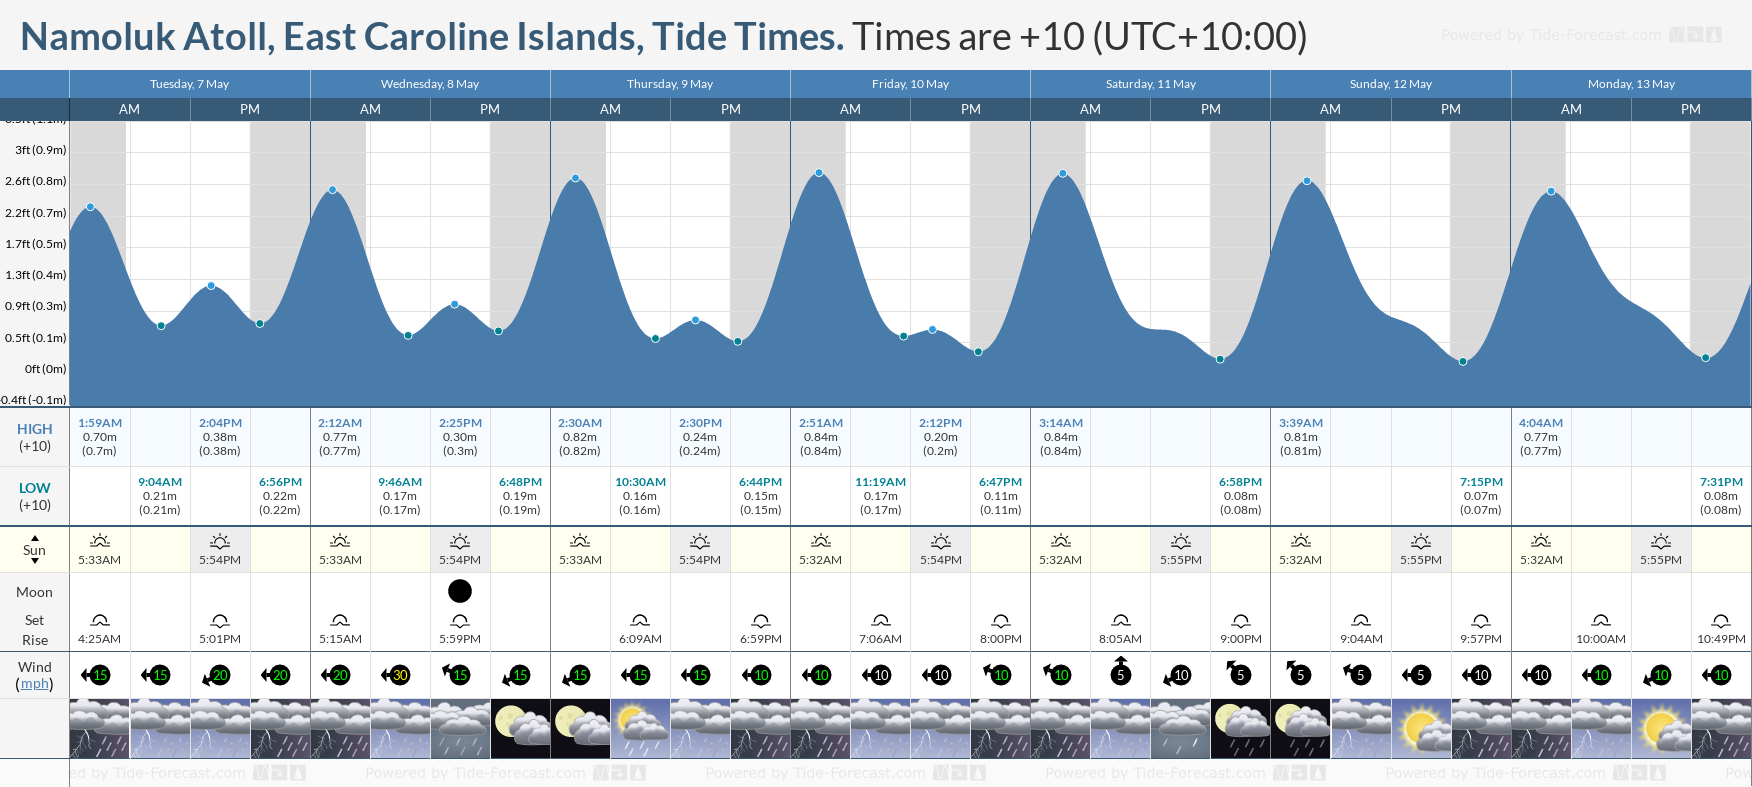 Namoluk Atoll, East Caroline Islands Tide Chart including high and low tide times for the next 7 days